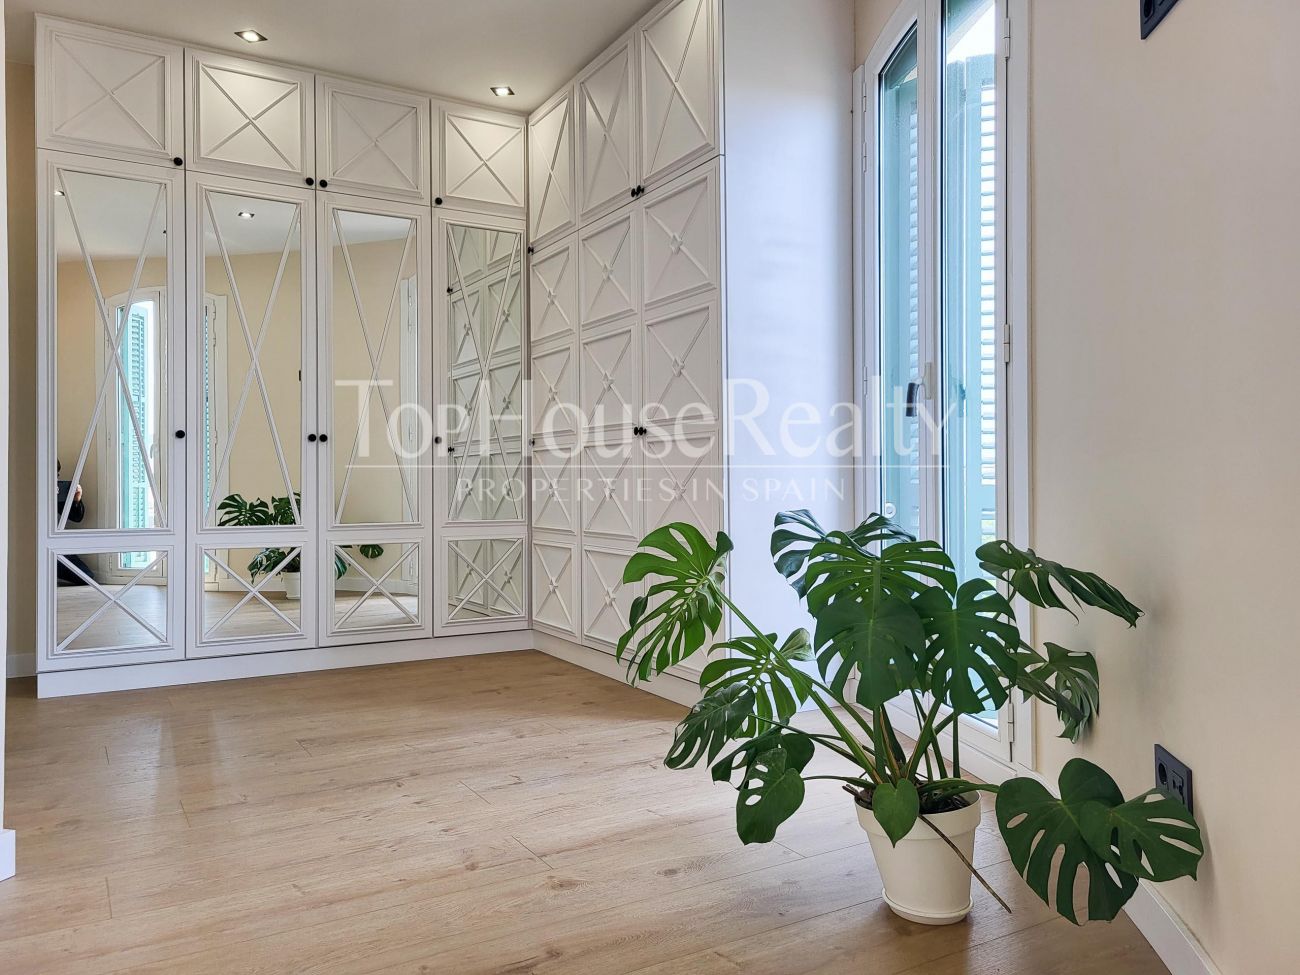 The apartment is located in the heart of Barcelona, in one of the most prestigious neighborhoods, L'Esquerra de l'Eixample